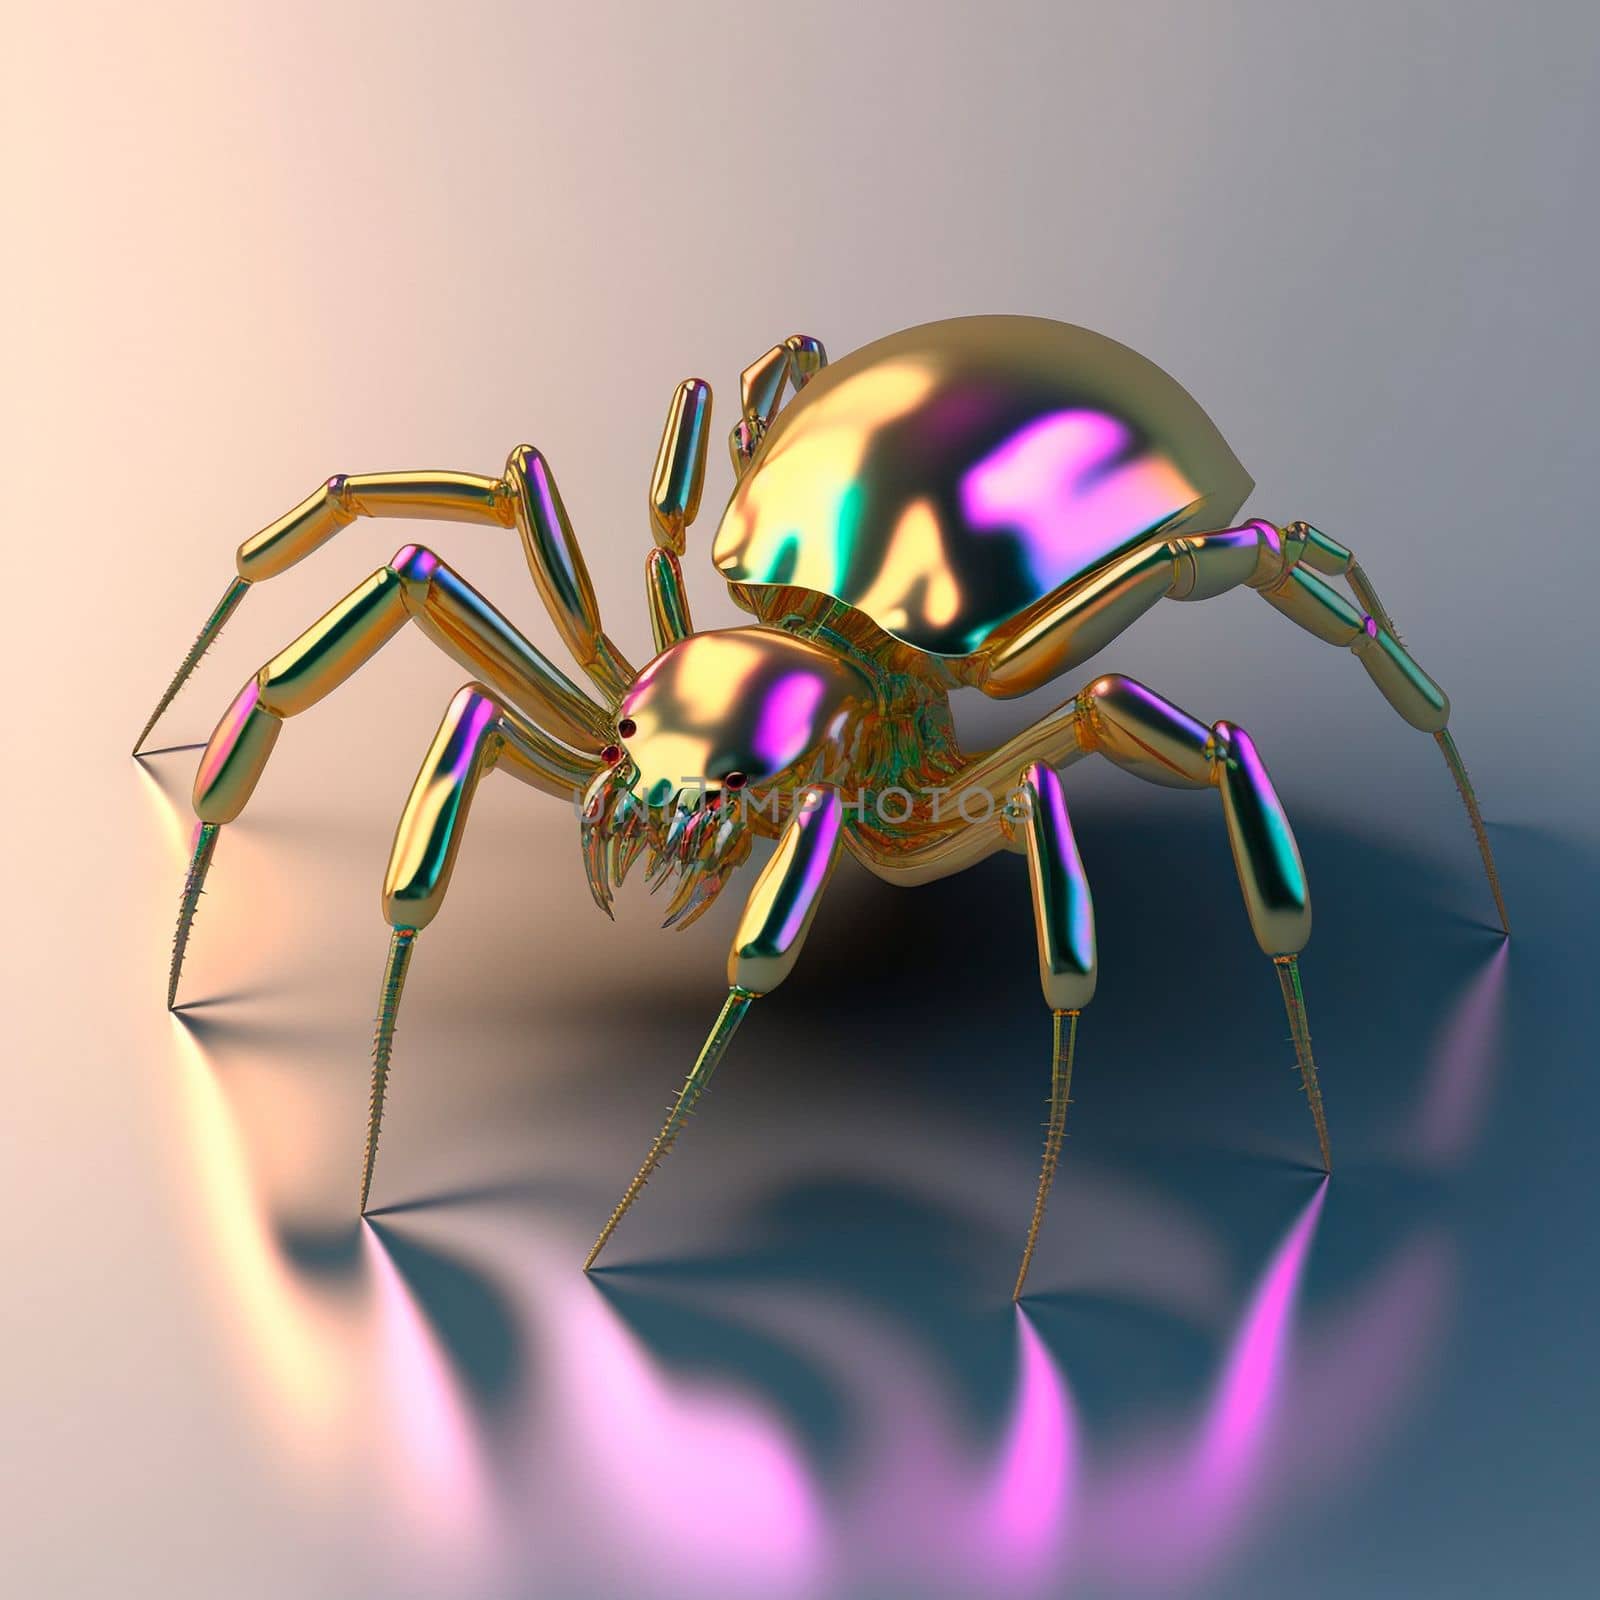 3d model of a pink and gold spider. Shiny , glossy figure by NeuroSky